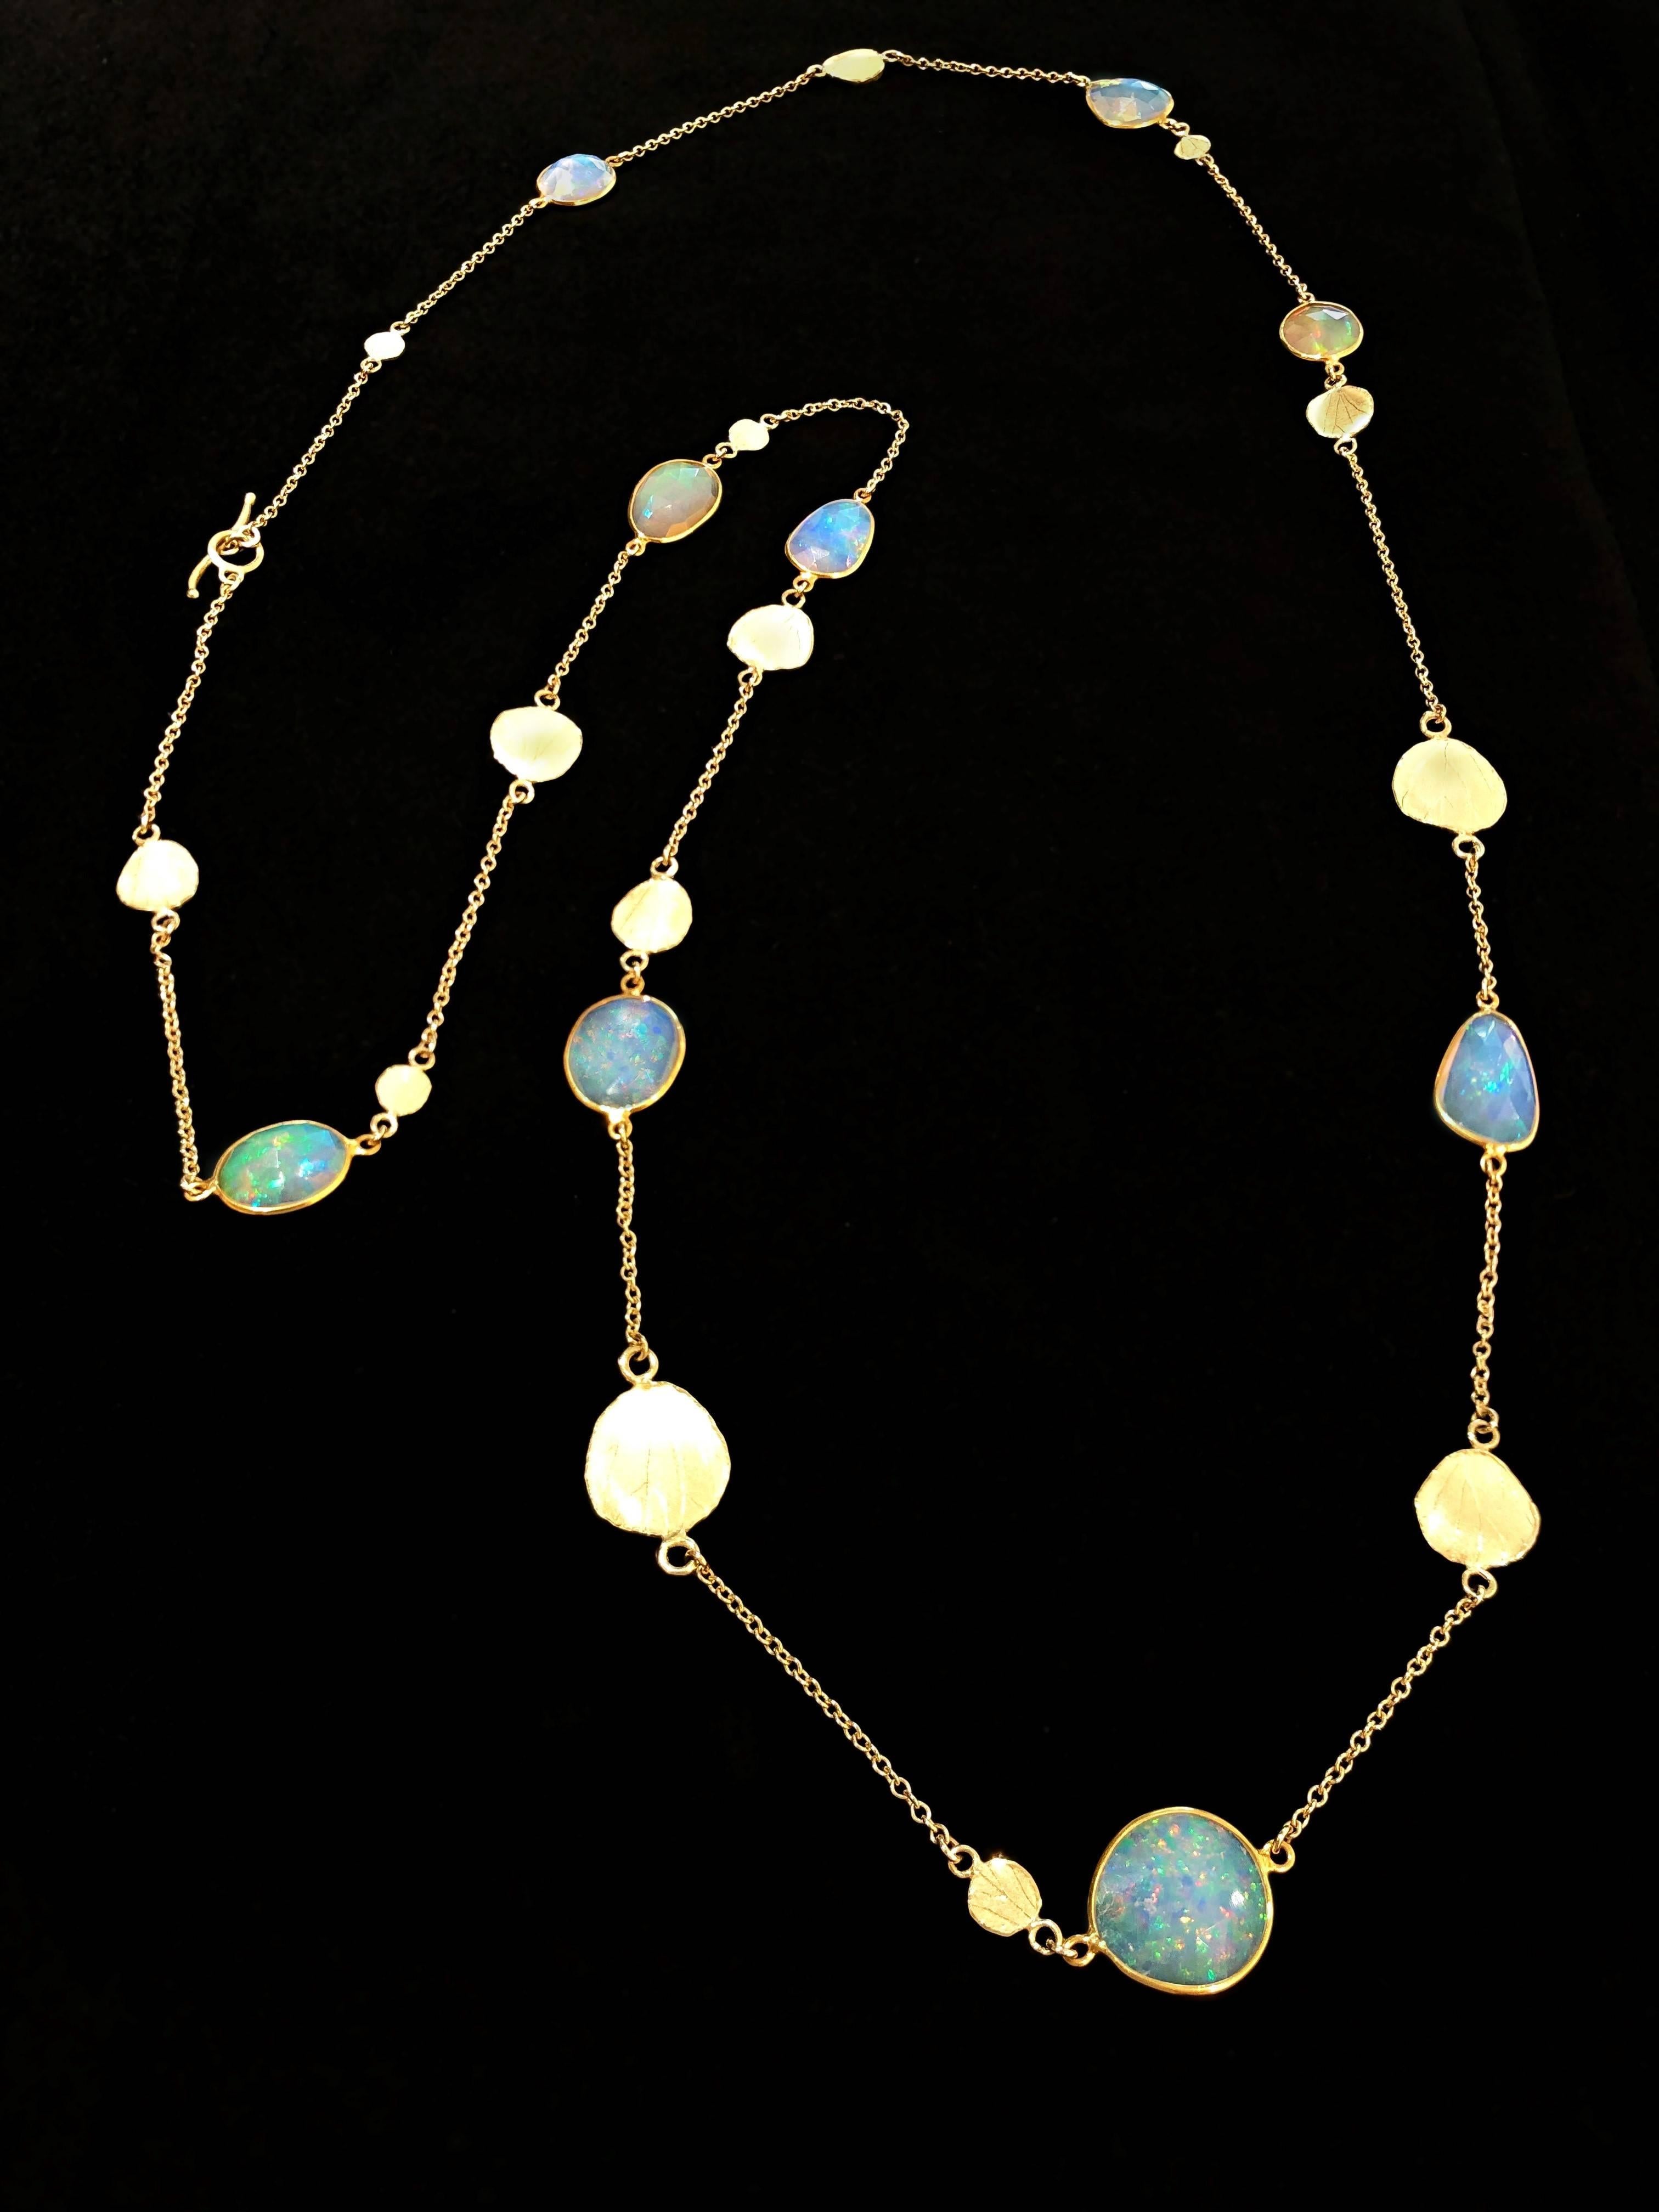 Long Petals Necklace handcrafted by award-winning jewelry artist Barbara Heinrich in matte-finished 18k yellow gold with nine faceted rose-cut Ethiopian opals and accented by 18k yellow gold petal spacers and lobster clasp. 36